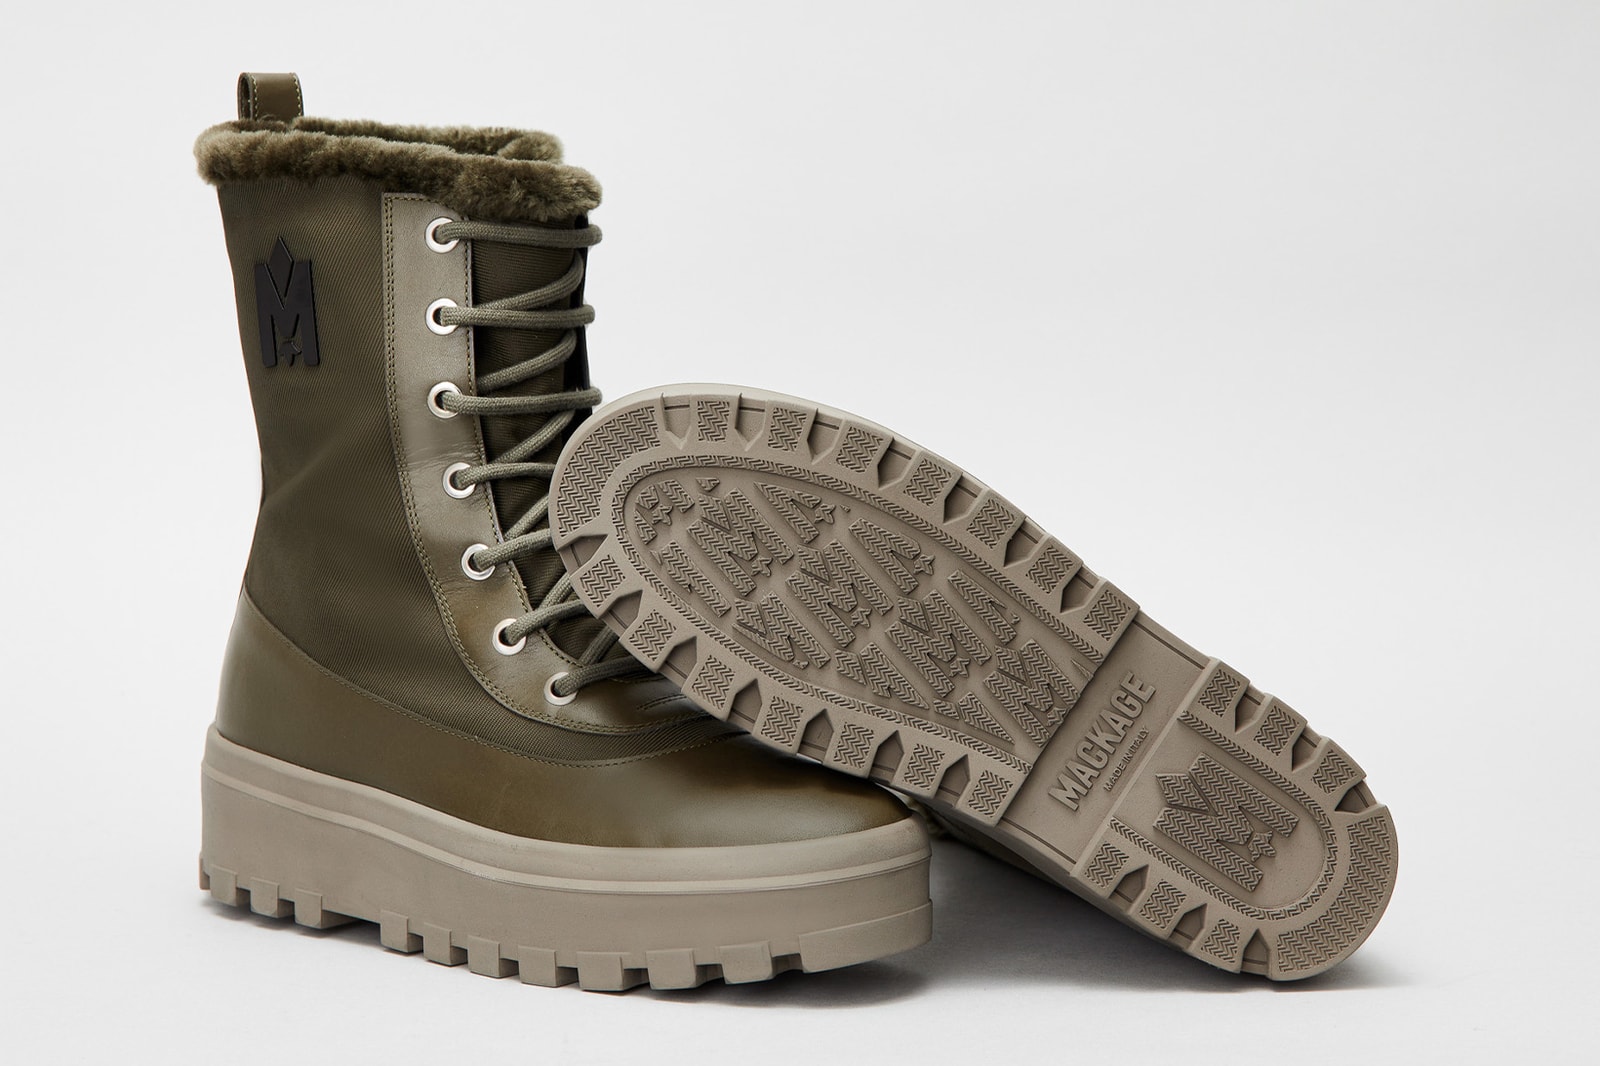 mackage boots winter cold weather warm chunky unisex hero noble rebelle warrior footwear release